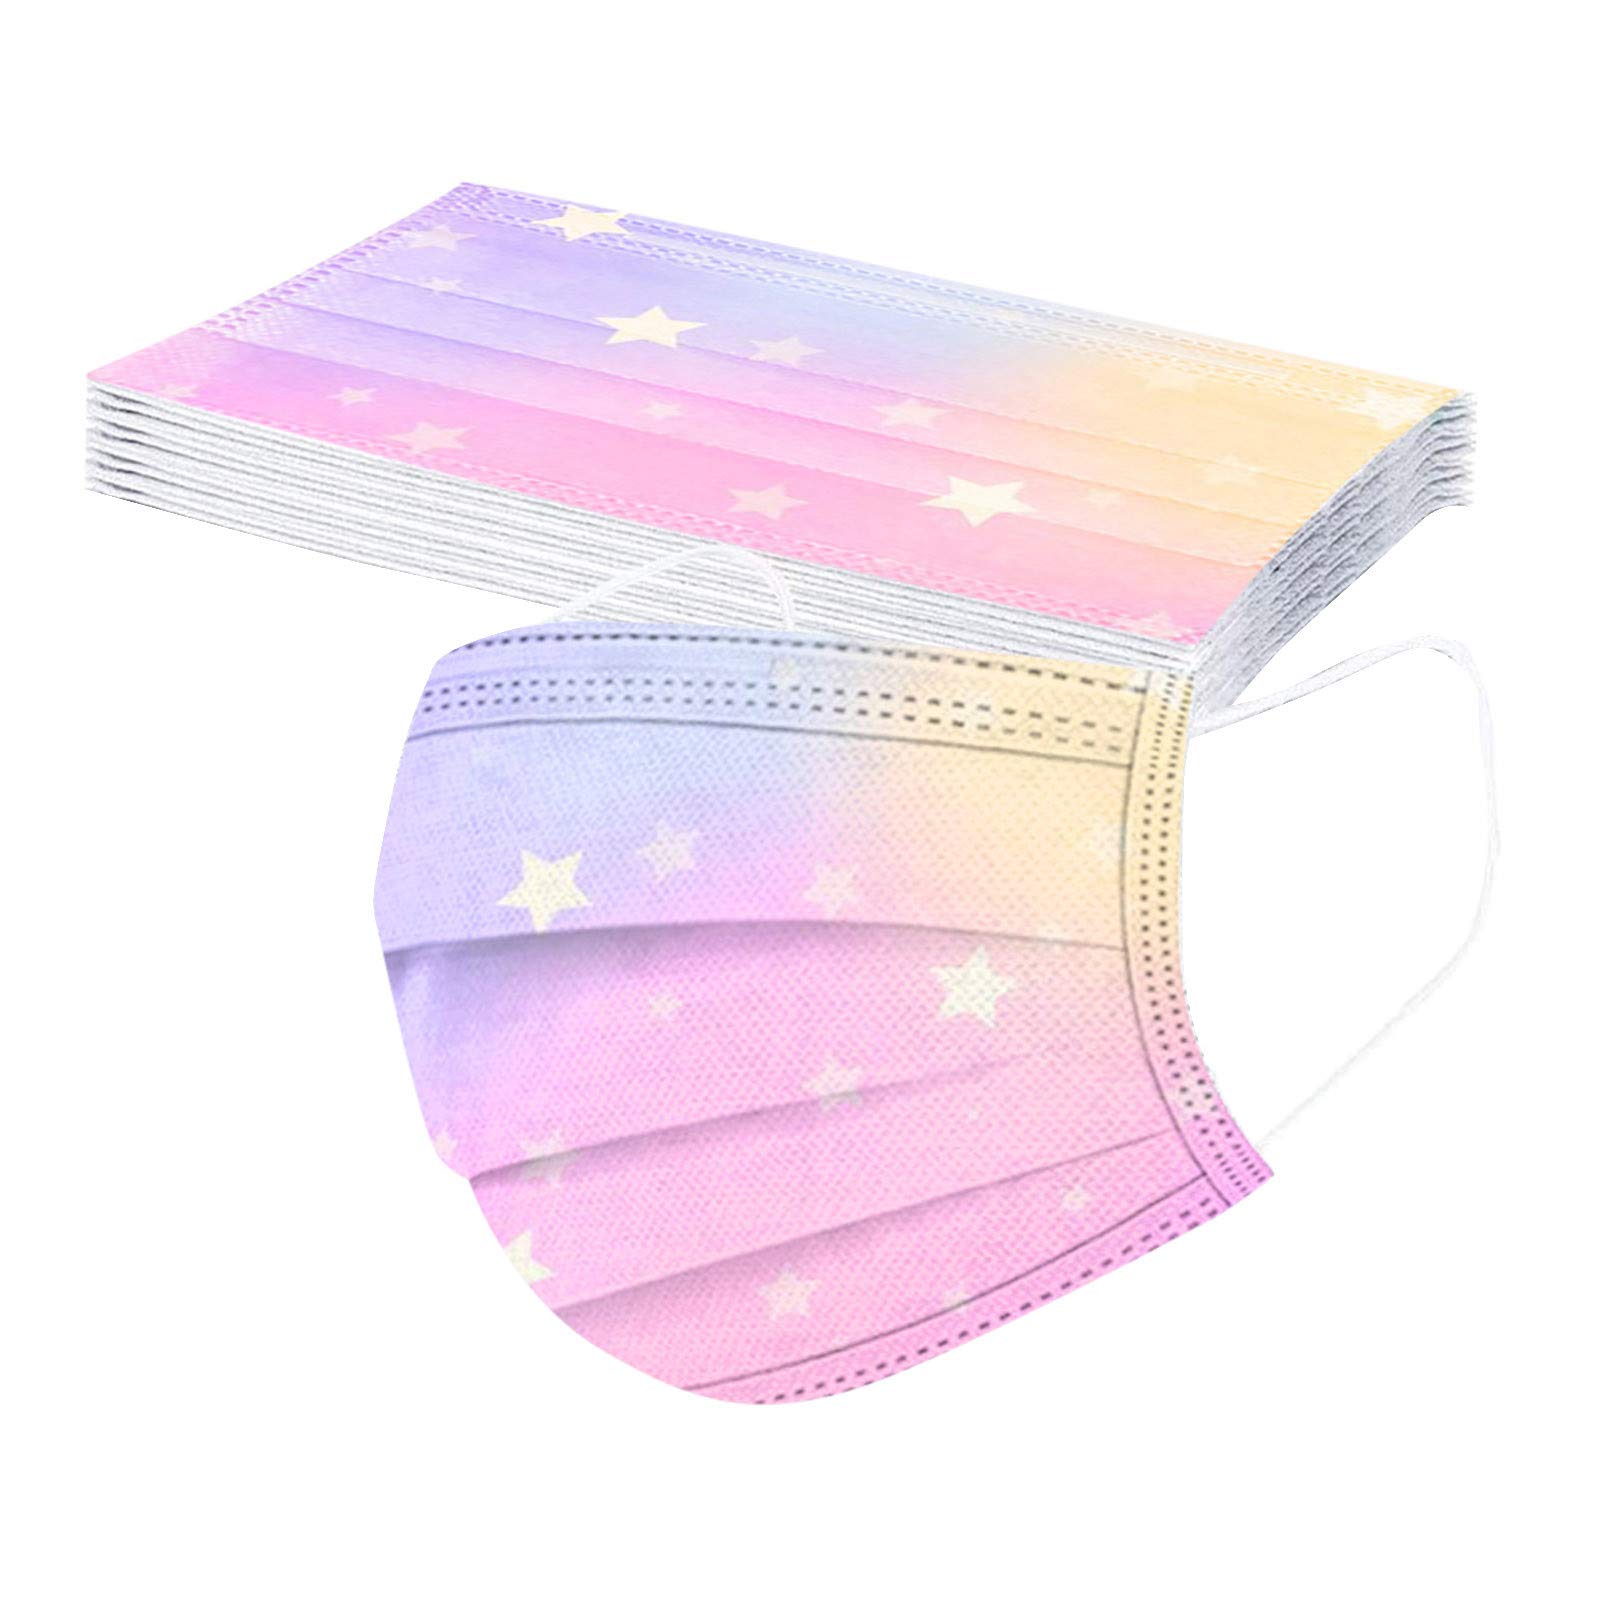 AIHOU 50PC Kids Butterfly Disposable Face Mask Childrens 3Ply Protective Breathable Kids Face Mask Boys Girls Outdoor School, 01,50pcs Disposable Mask 16, Kids Size (010000)